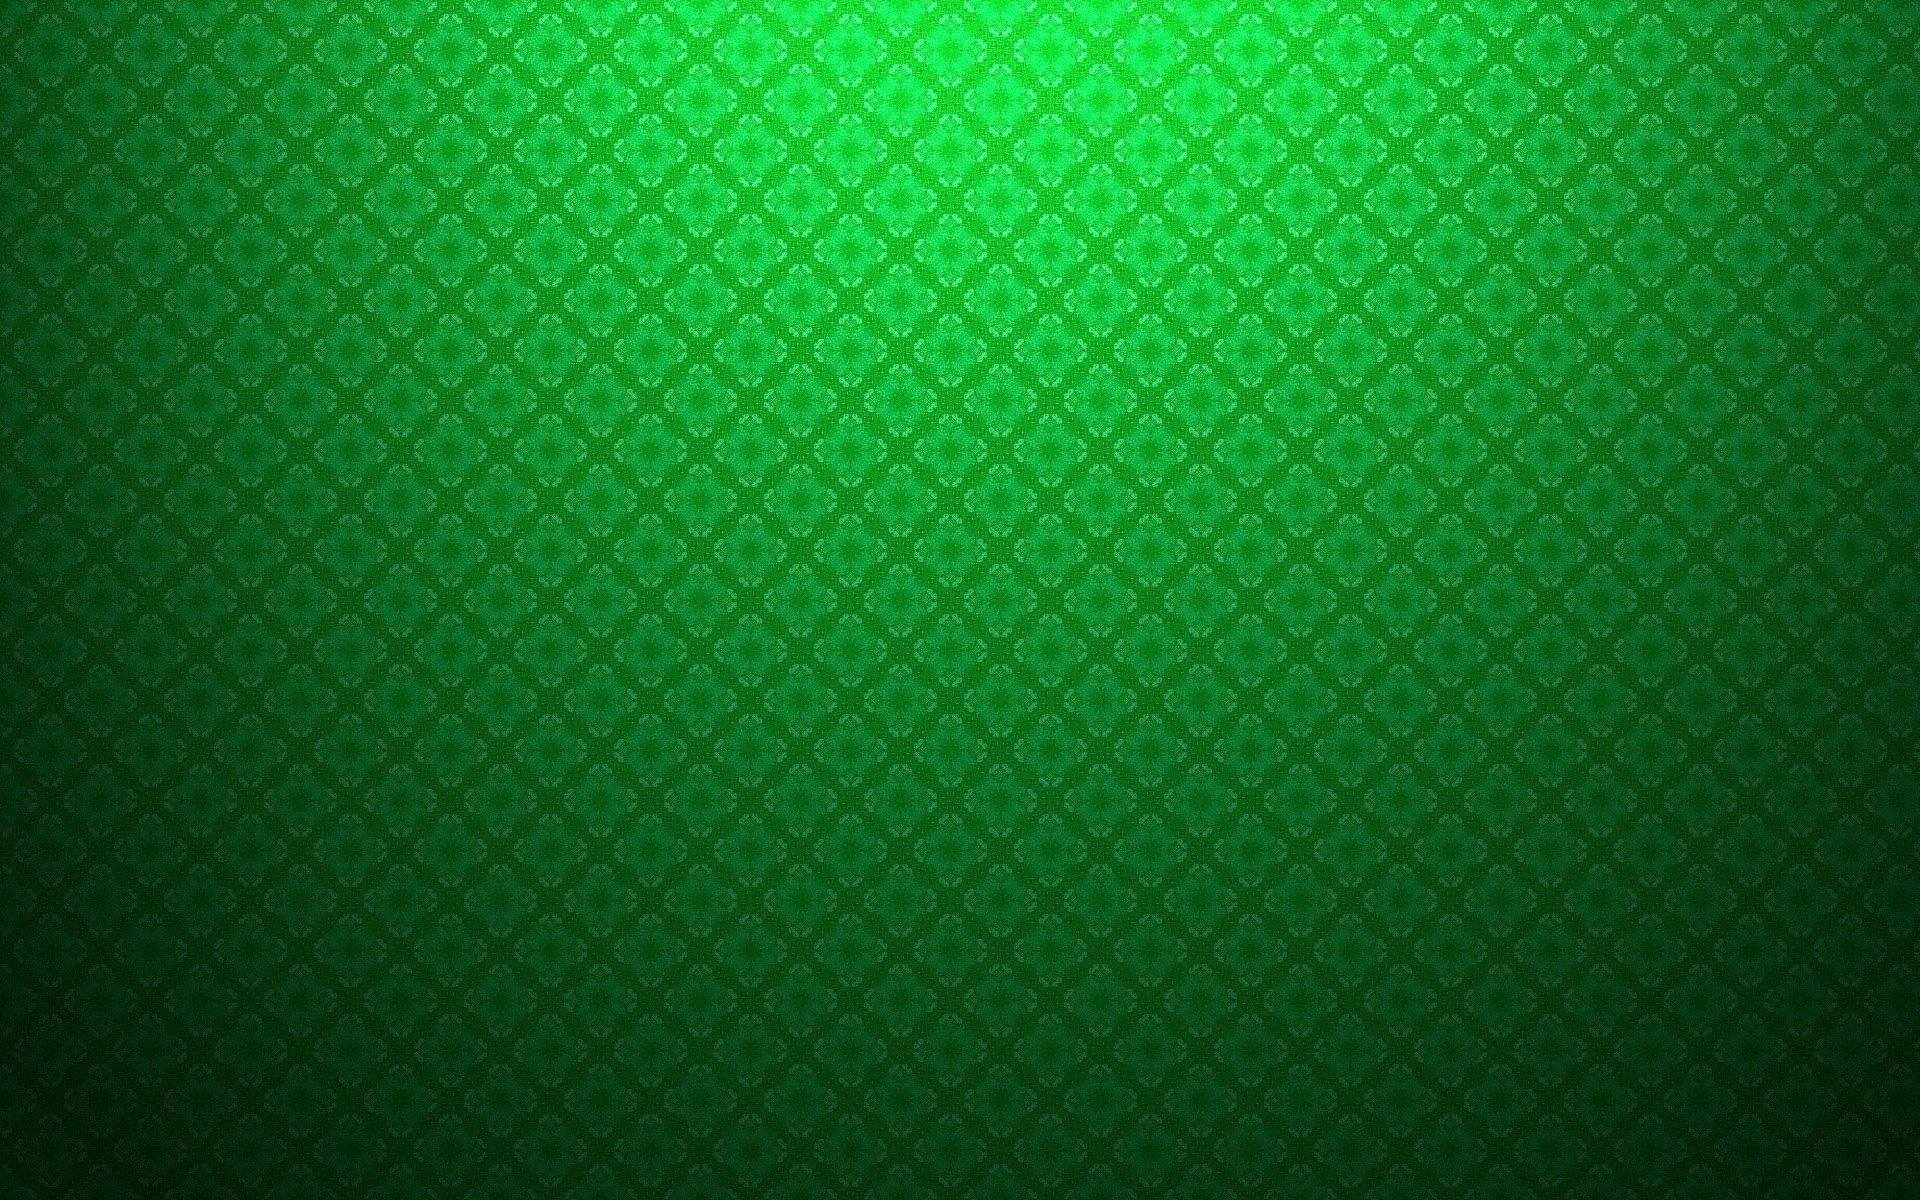 Green Background 10 - Green Floral Texture Background - 1920x1200 Wallpaper  